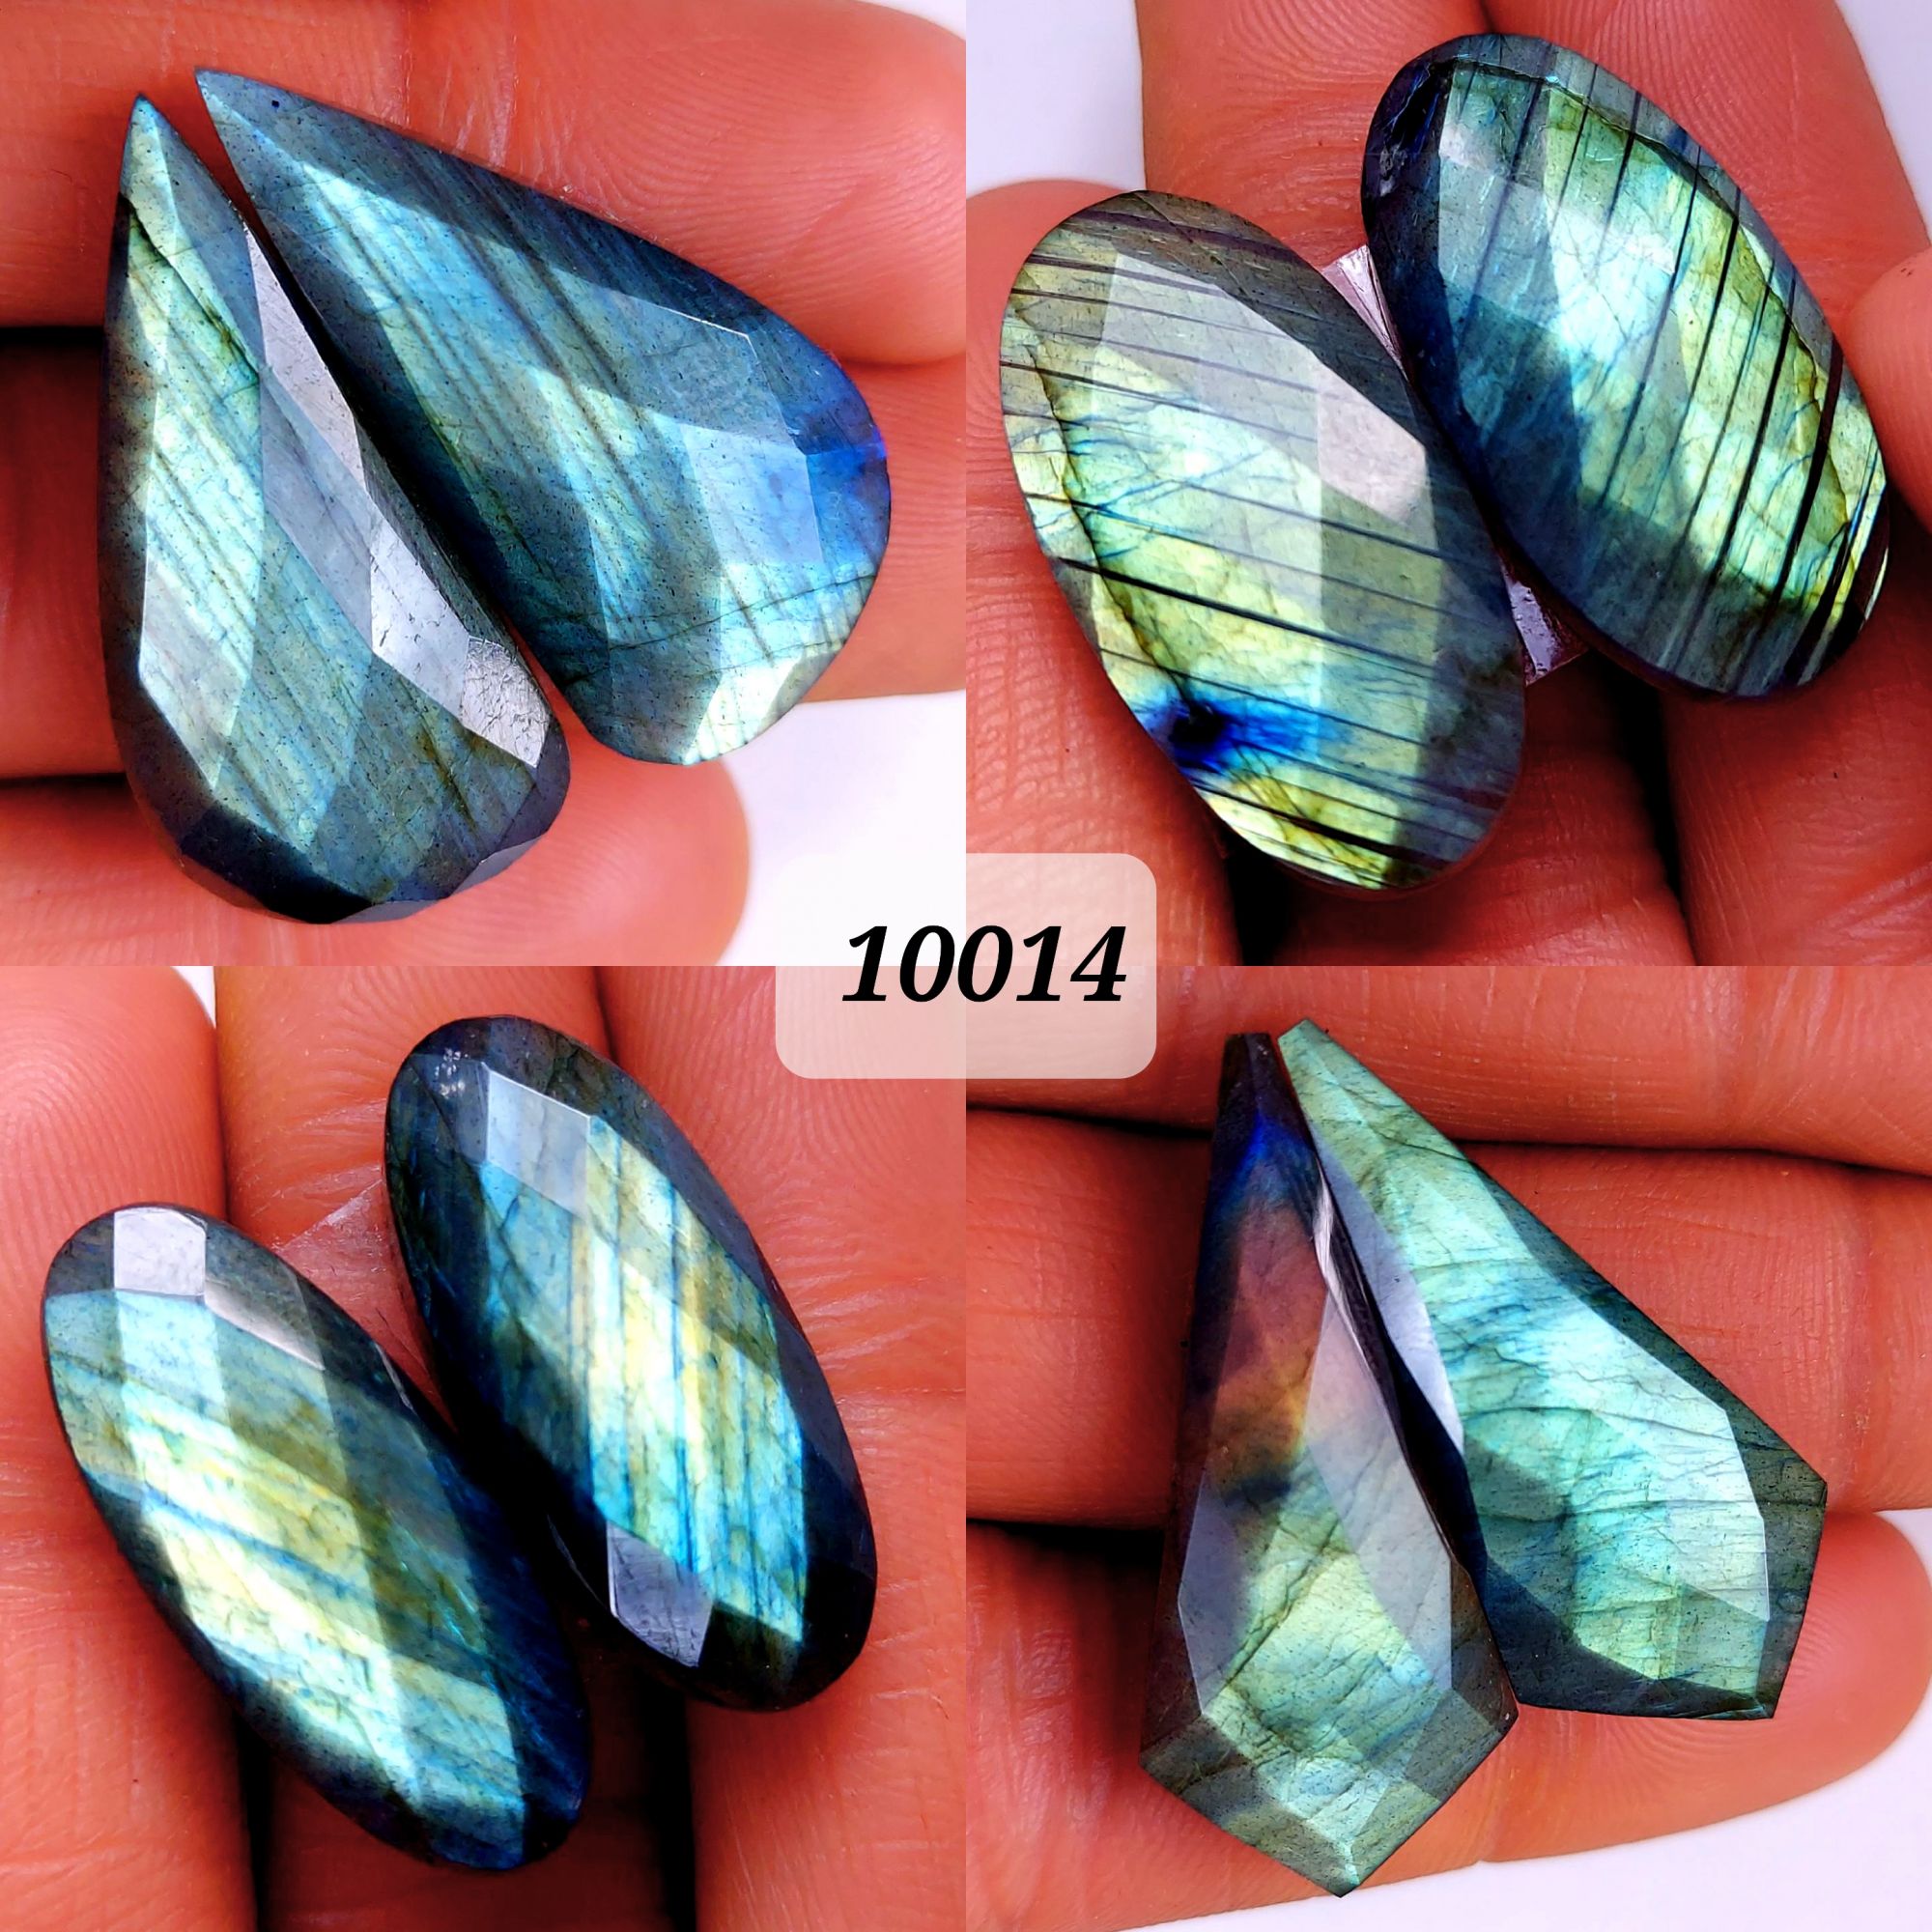 4Pair 161Cts Natural Labradorite Blue Fire Faceted Dangle Drop Earrings Semi Precious Crystal For Hoop Earrings Blue Gemstone Cabochon Matching pair 35x15 25x10mm #10014